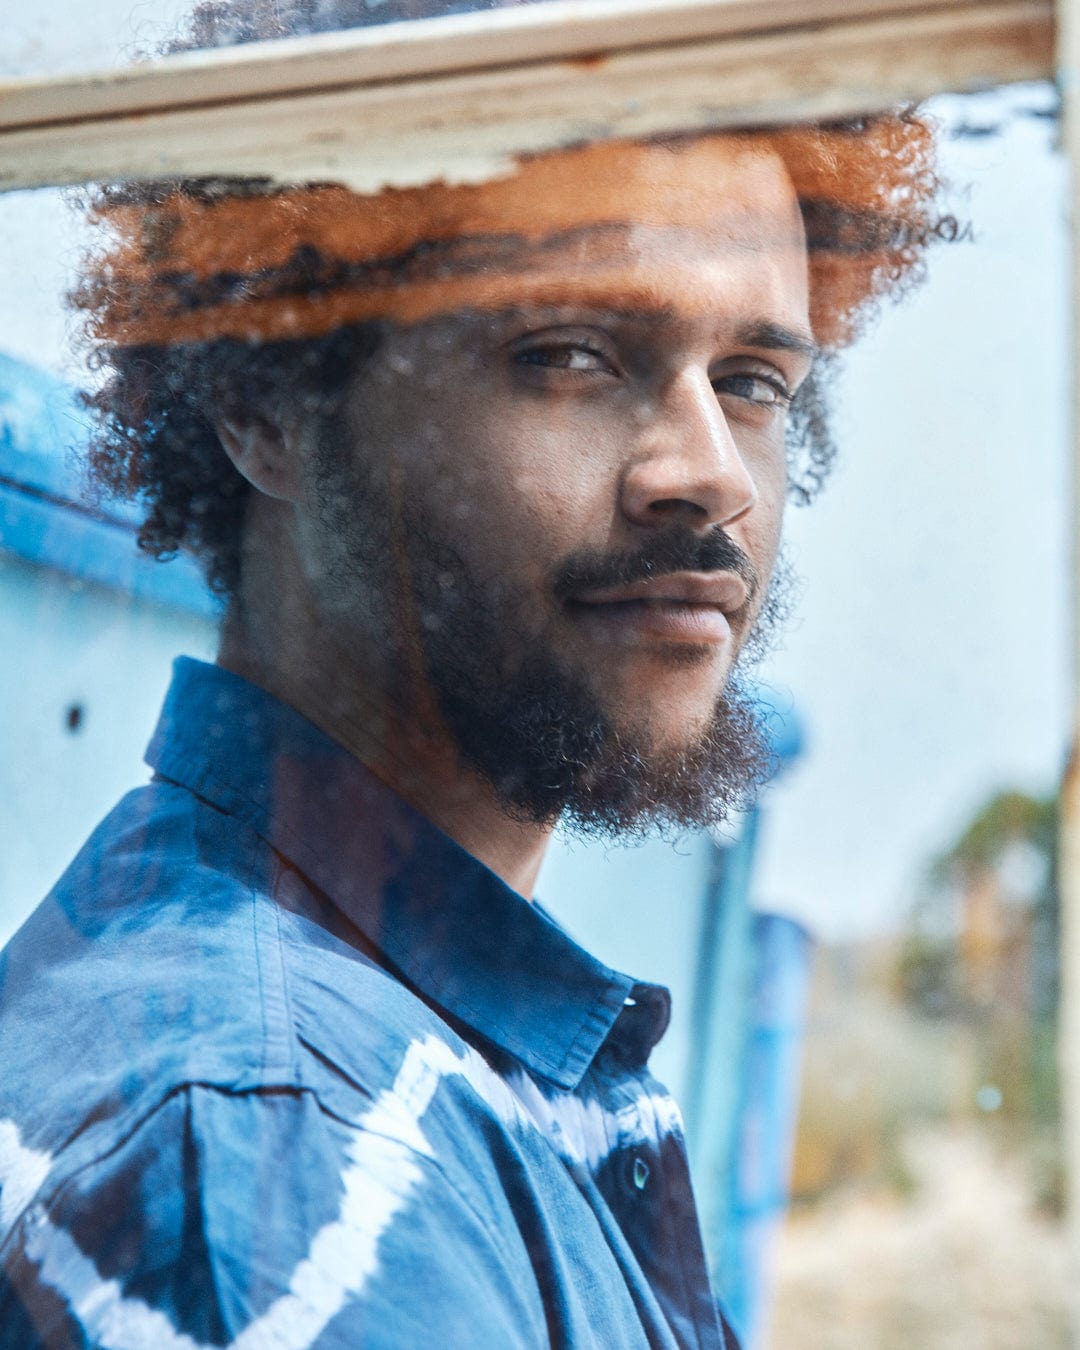 Man with curly hair looking through a glass window, wearing a Saltrock Ocean - Mens Tie Dye Shirt in Blue. Reflection visible on the glass.